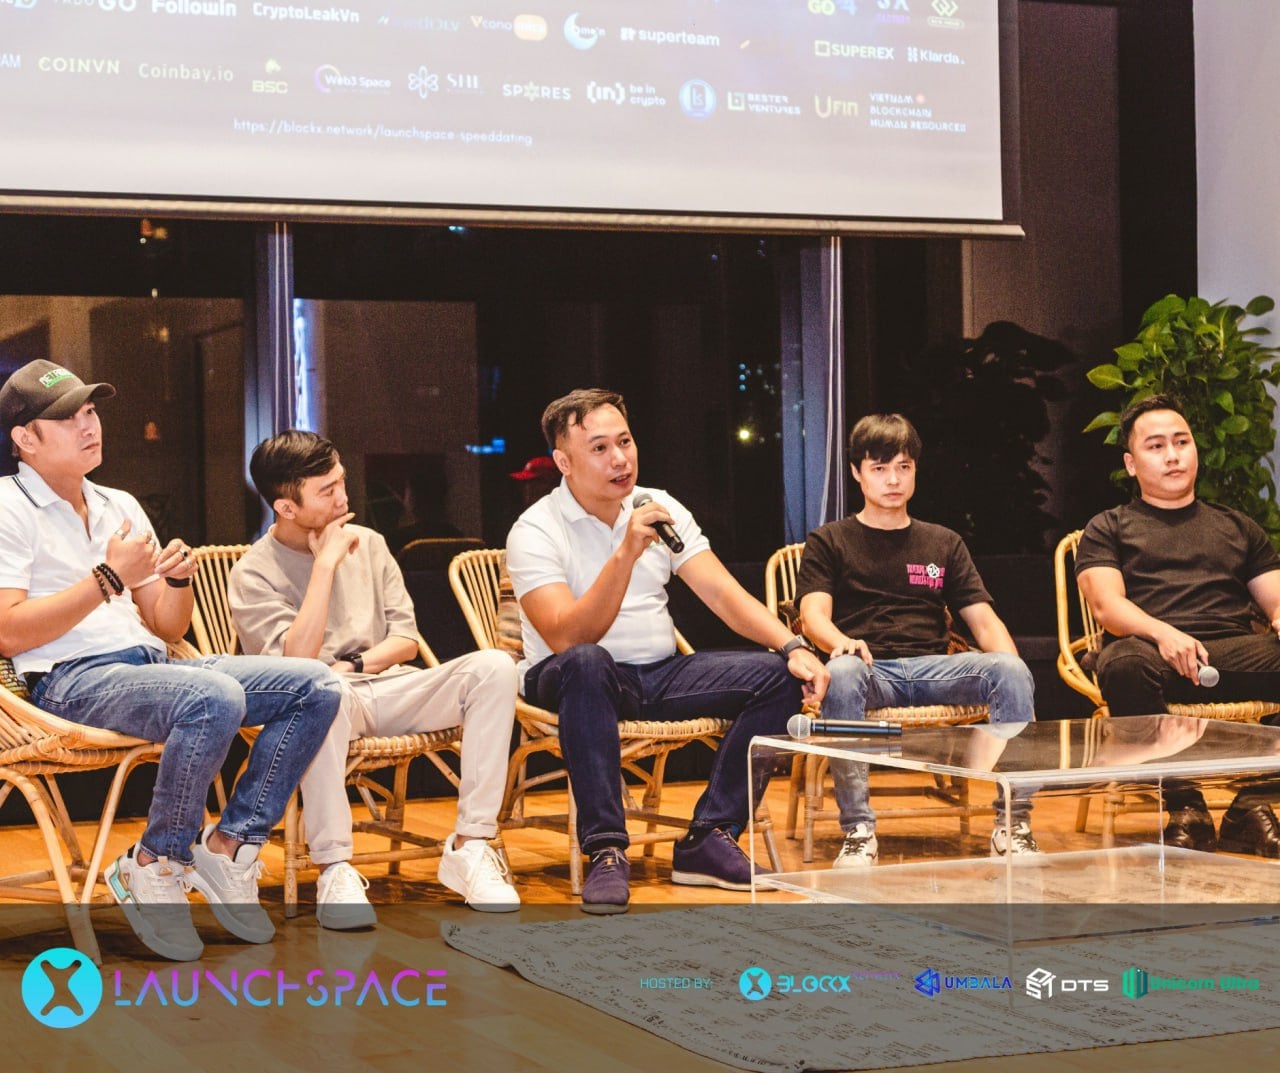 Re- Cap: Event "LAUNCHSPACE: CO-FOUNDER SPEED DATING"